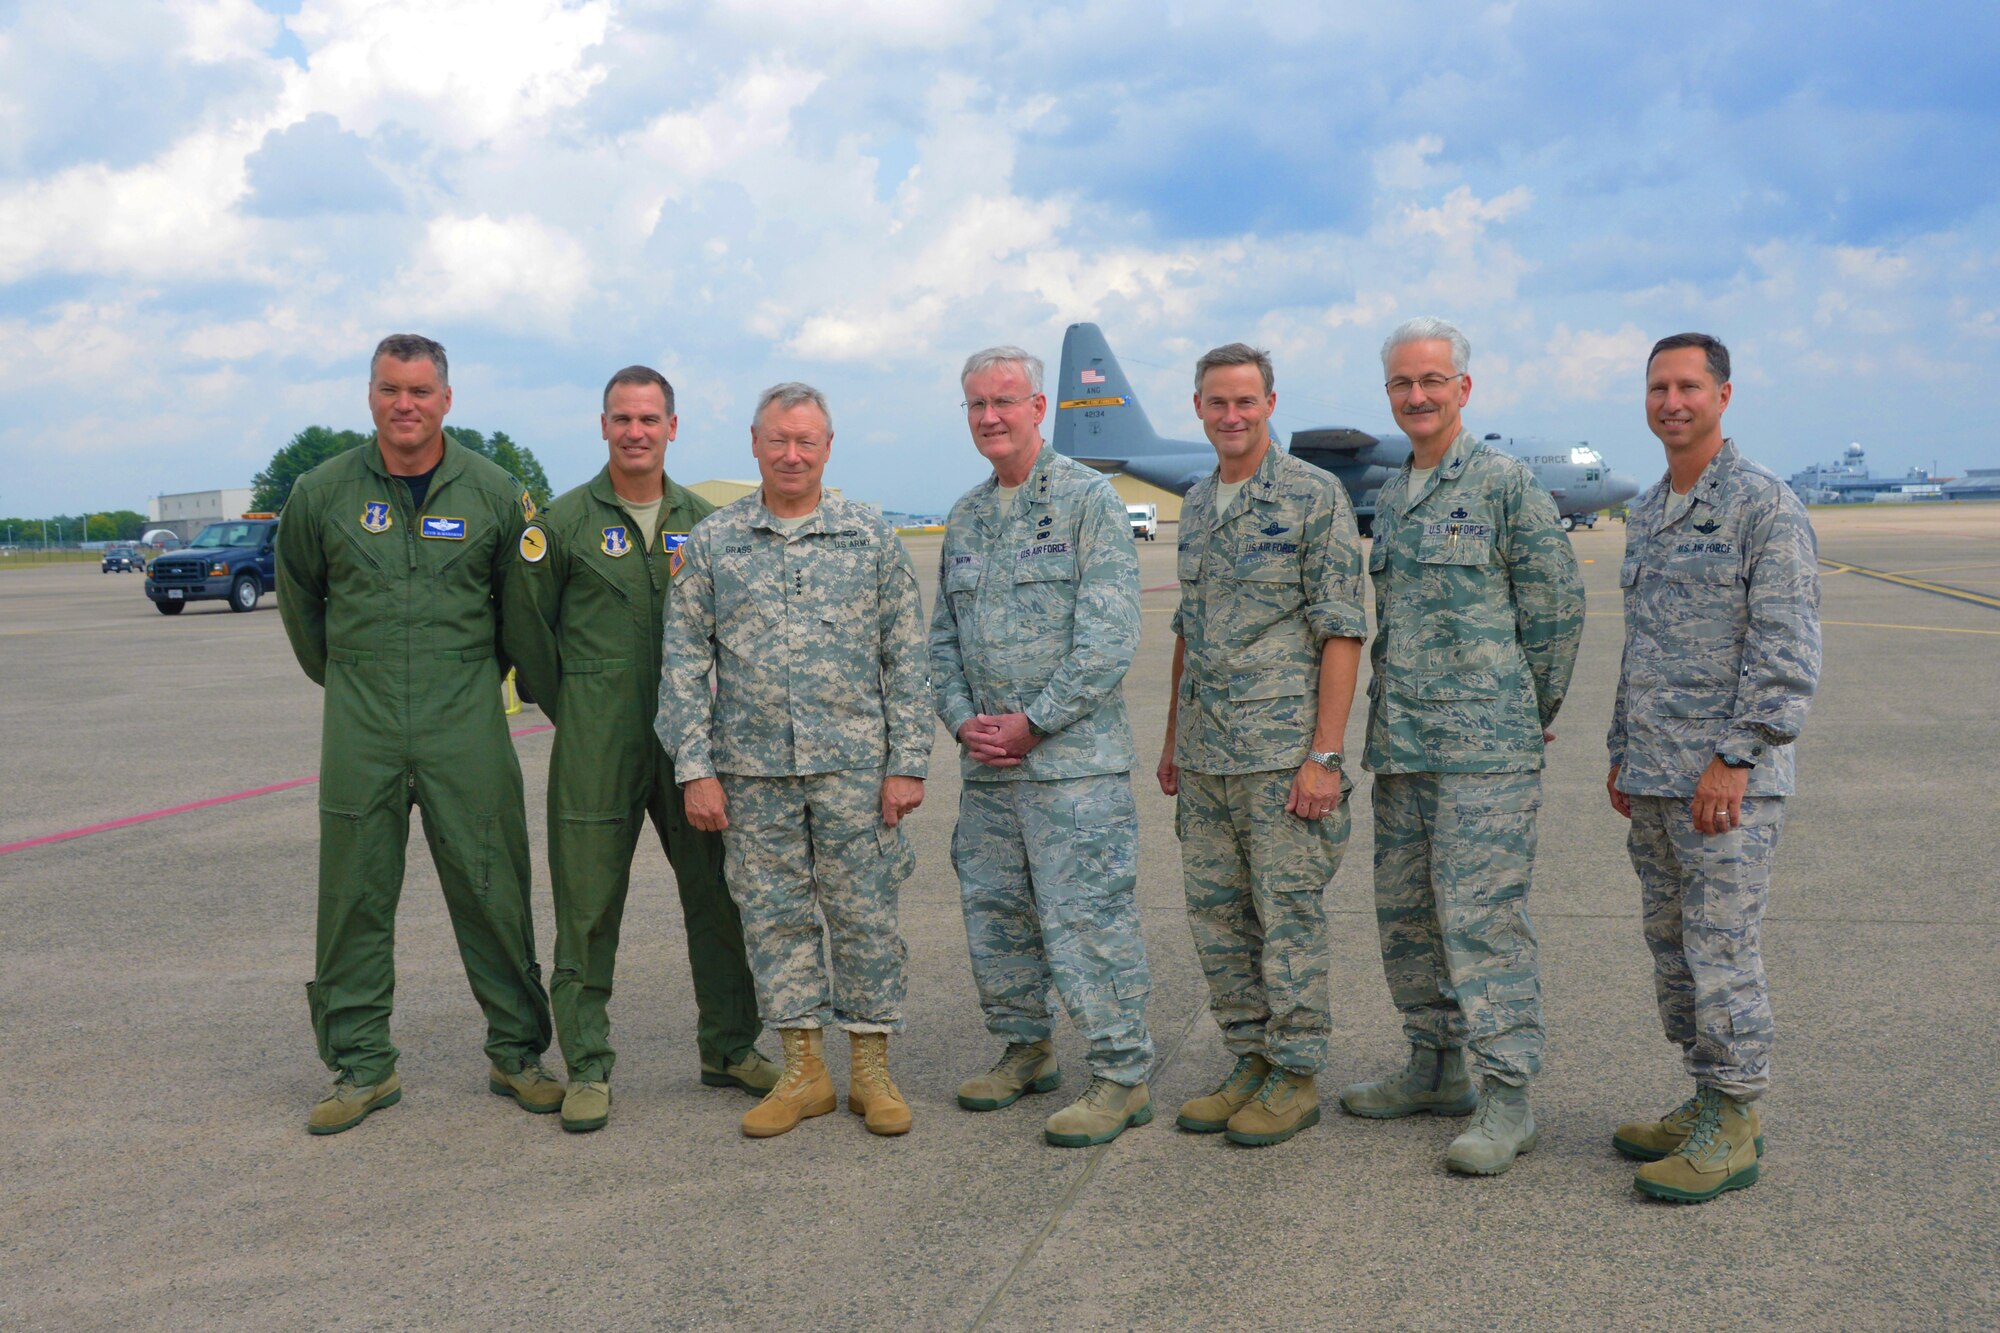 Col. Kevin McManaman, Col. Frank Detorie, Gen. Frank J. Grass, Maj. Gen. Thad Martin, Brig. Gen. Jon Mott, Col. Frederick Miclon, and Brig. Gen. Peter Siana, (left to right) pose in front of a C-130H Hercules aircraft assigned to the 103rd Airlift Wing Sept. 6, 2014 at Bradley Air National Guard Base, East Granby, Conn. Grass toured the base and met with Conn. Airmen during a town hall meeting. (U.S. Air National Guard photo by Senior Airman Jennifer Pierce)